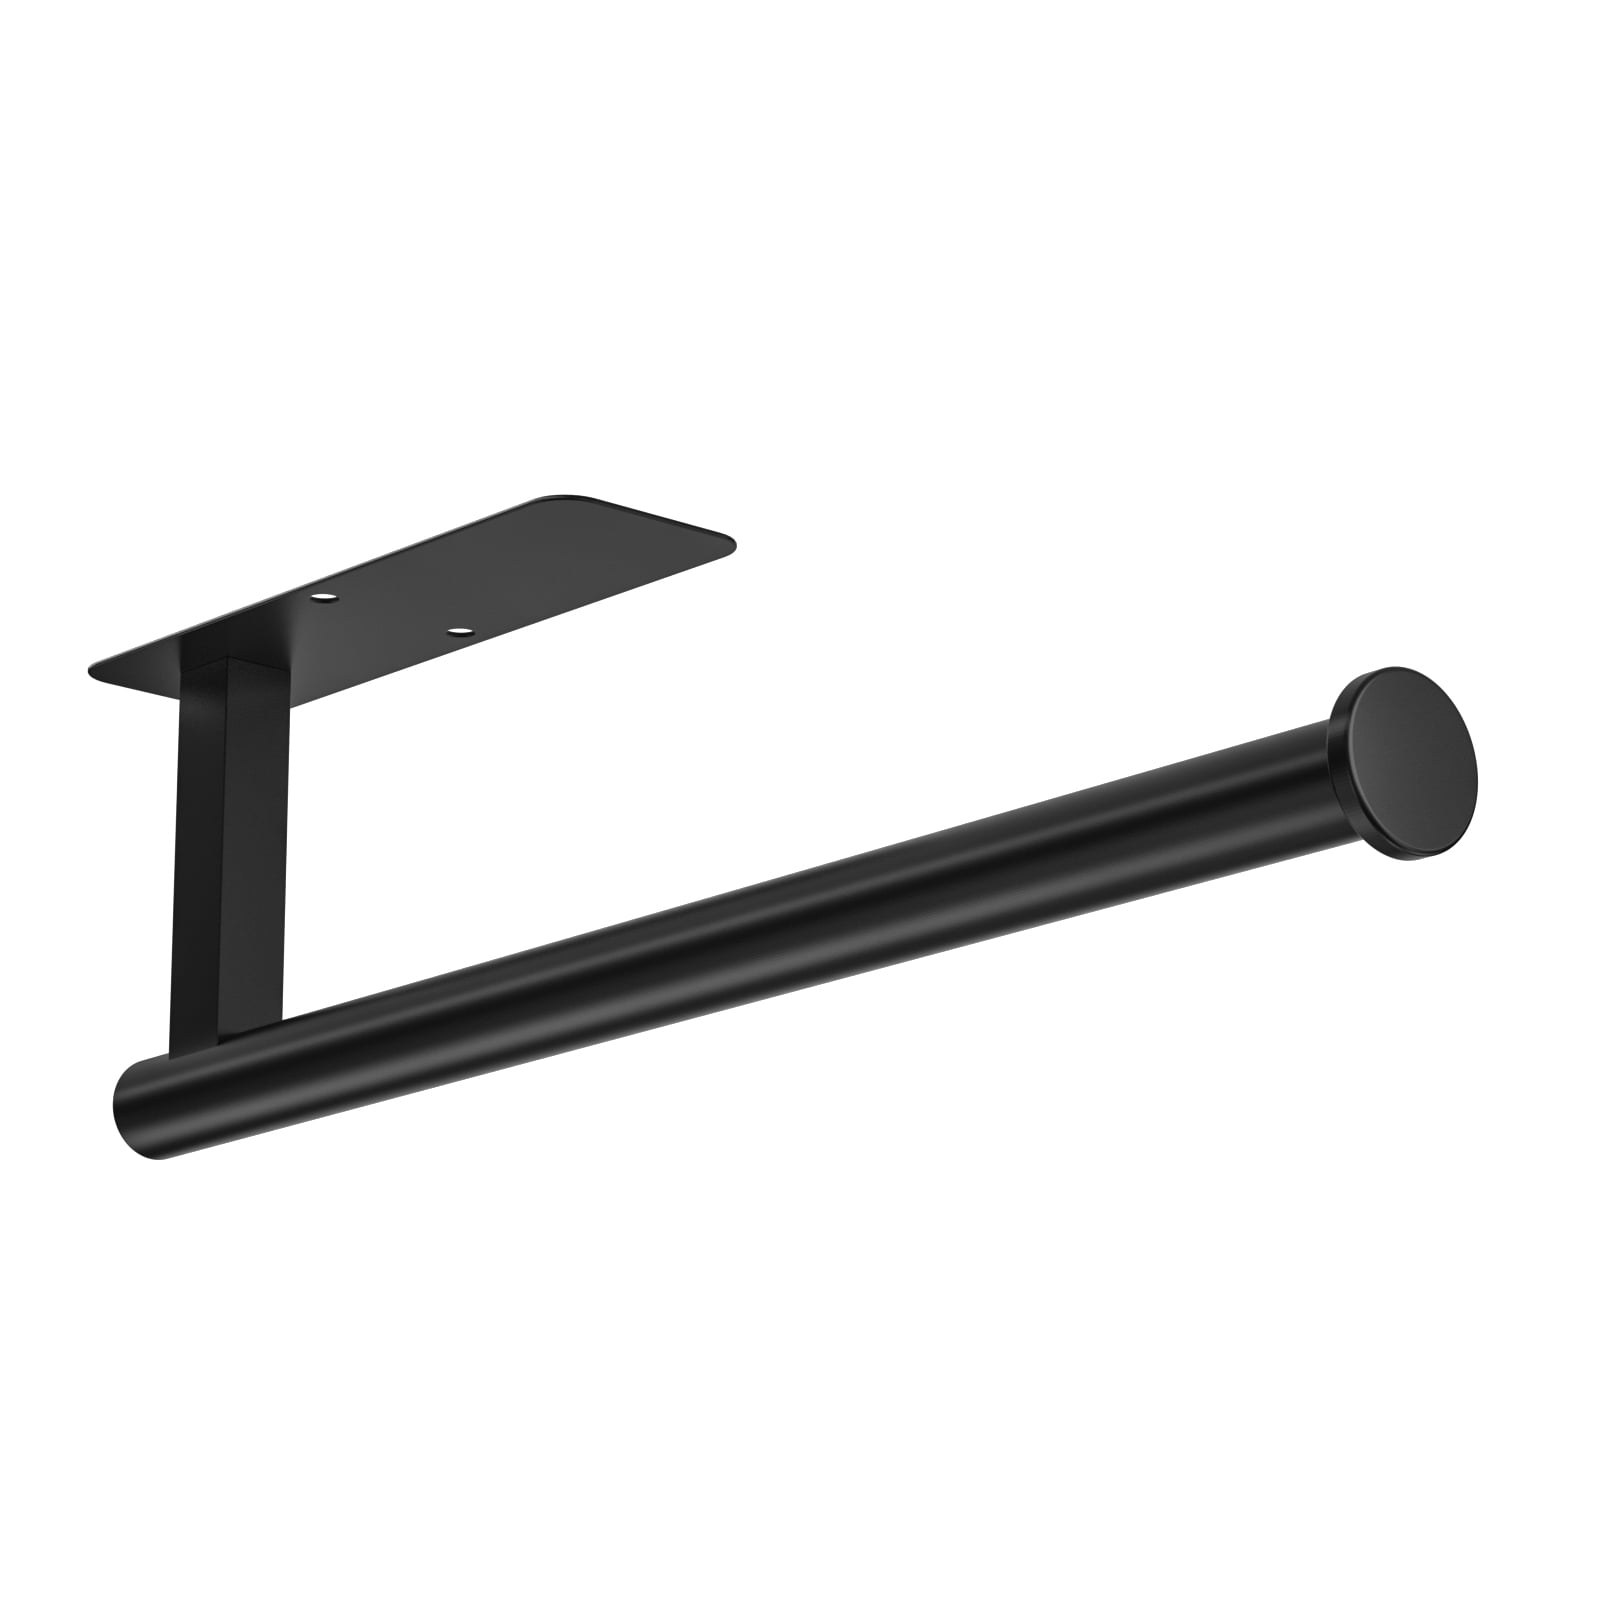 1pc Black Tl Paper Towel Holder [long Version] Stainless Steel Towel Rack,  No Drilling, Wall Mountable For Kitchen, Cabinet, Bathroom